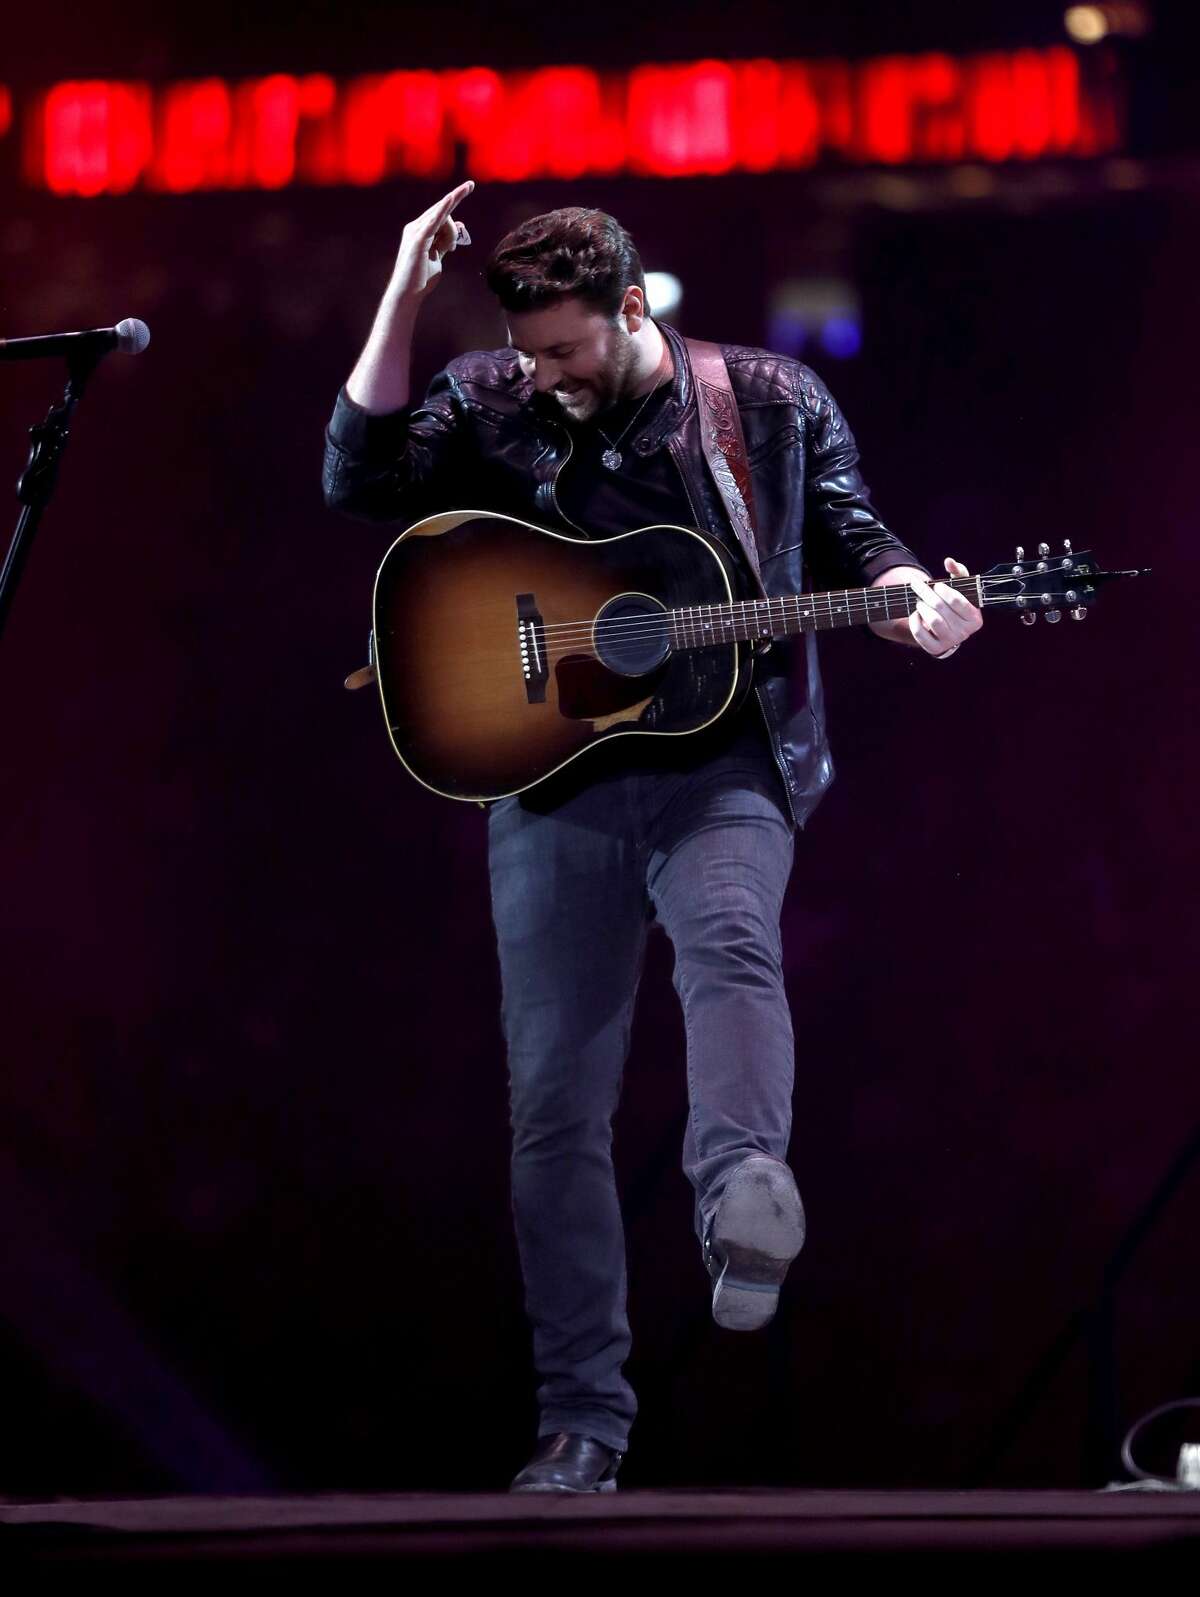 Chris Young performs in concert at the Houston Livestock Show and Rodeo at NRG Stadium, Wednesday, March 22, 2017, in Houston. ( Karen Warren / Houston Chronicle )